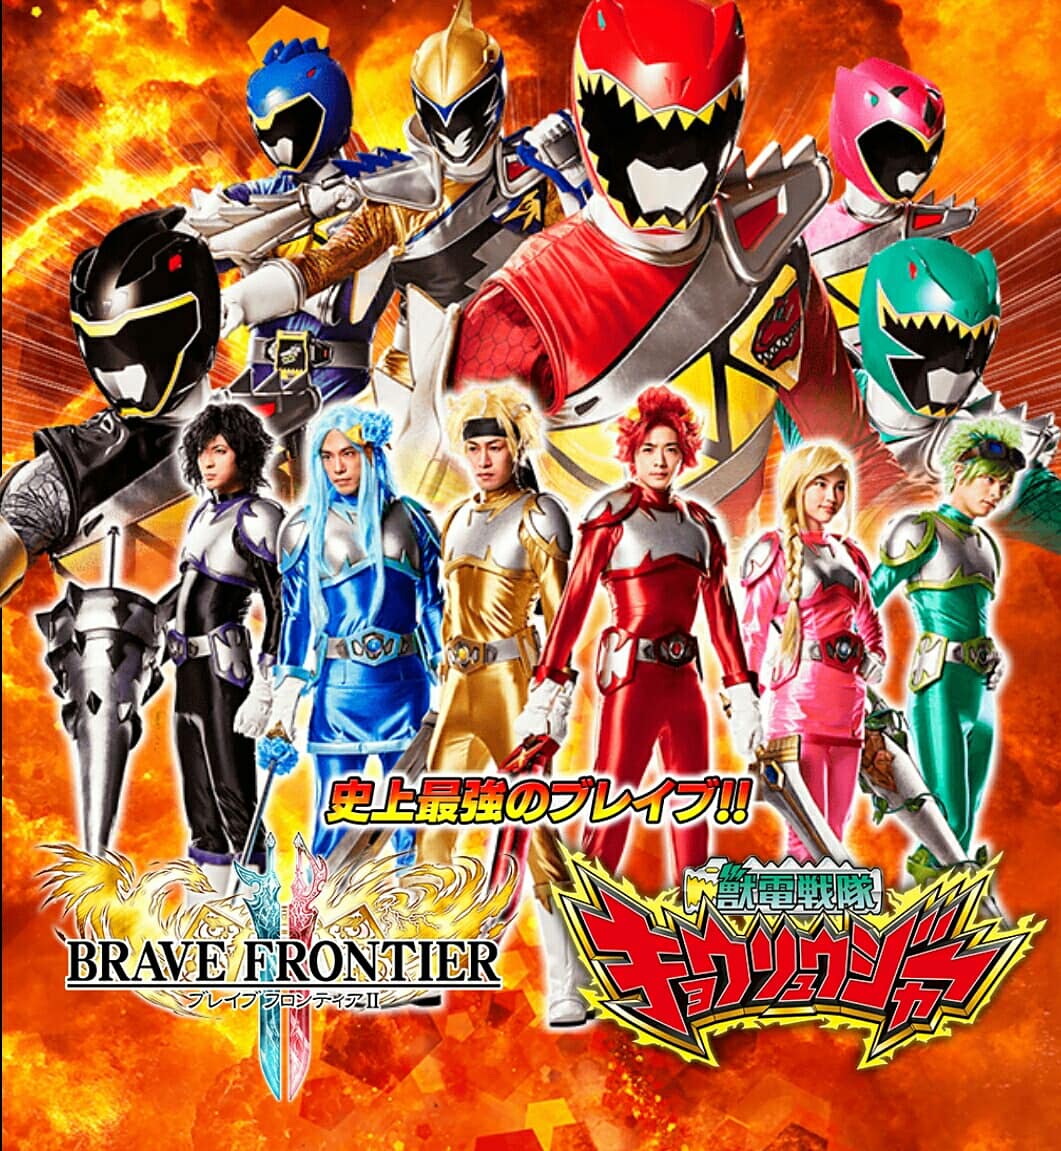 brave frontier – kyoryuger – Hero Club